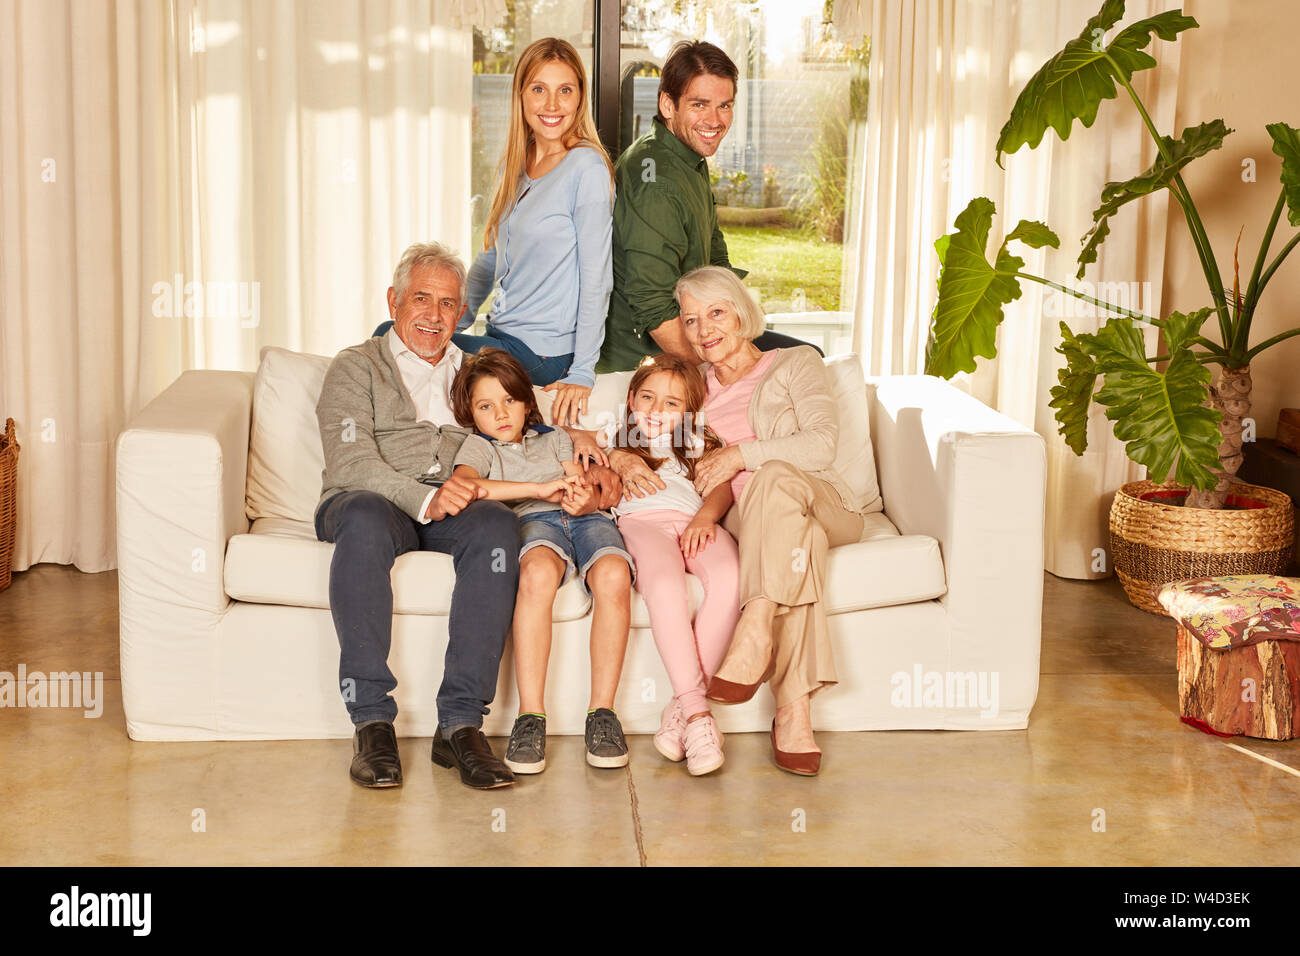 Extended family with grandparents and children together on the sofa at home Stock Photo